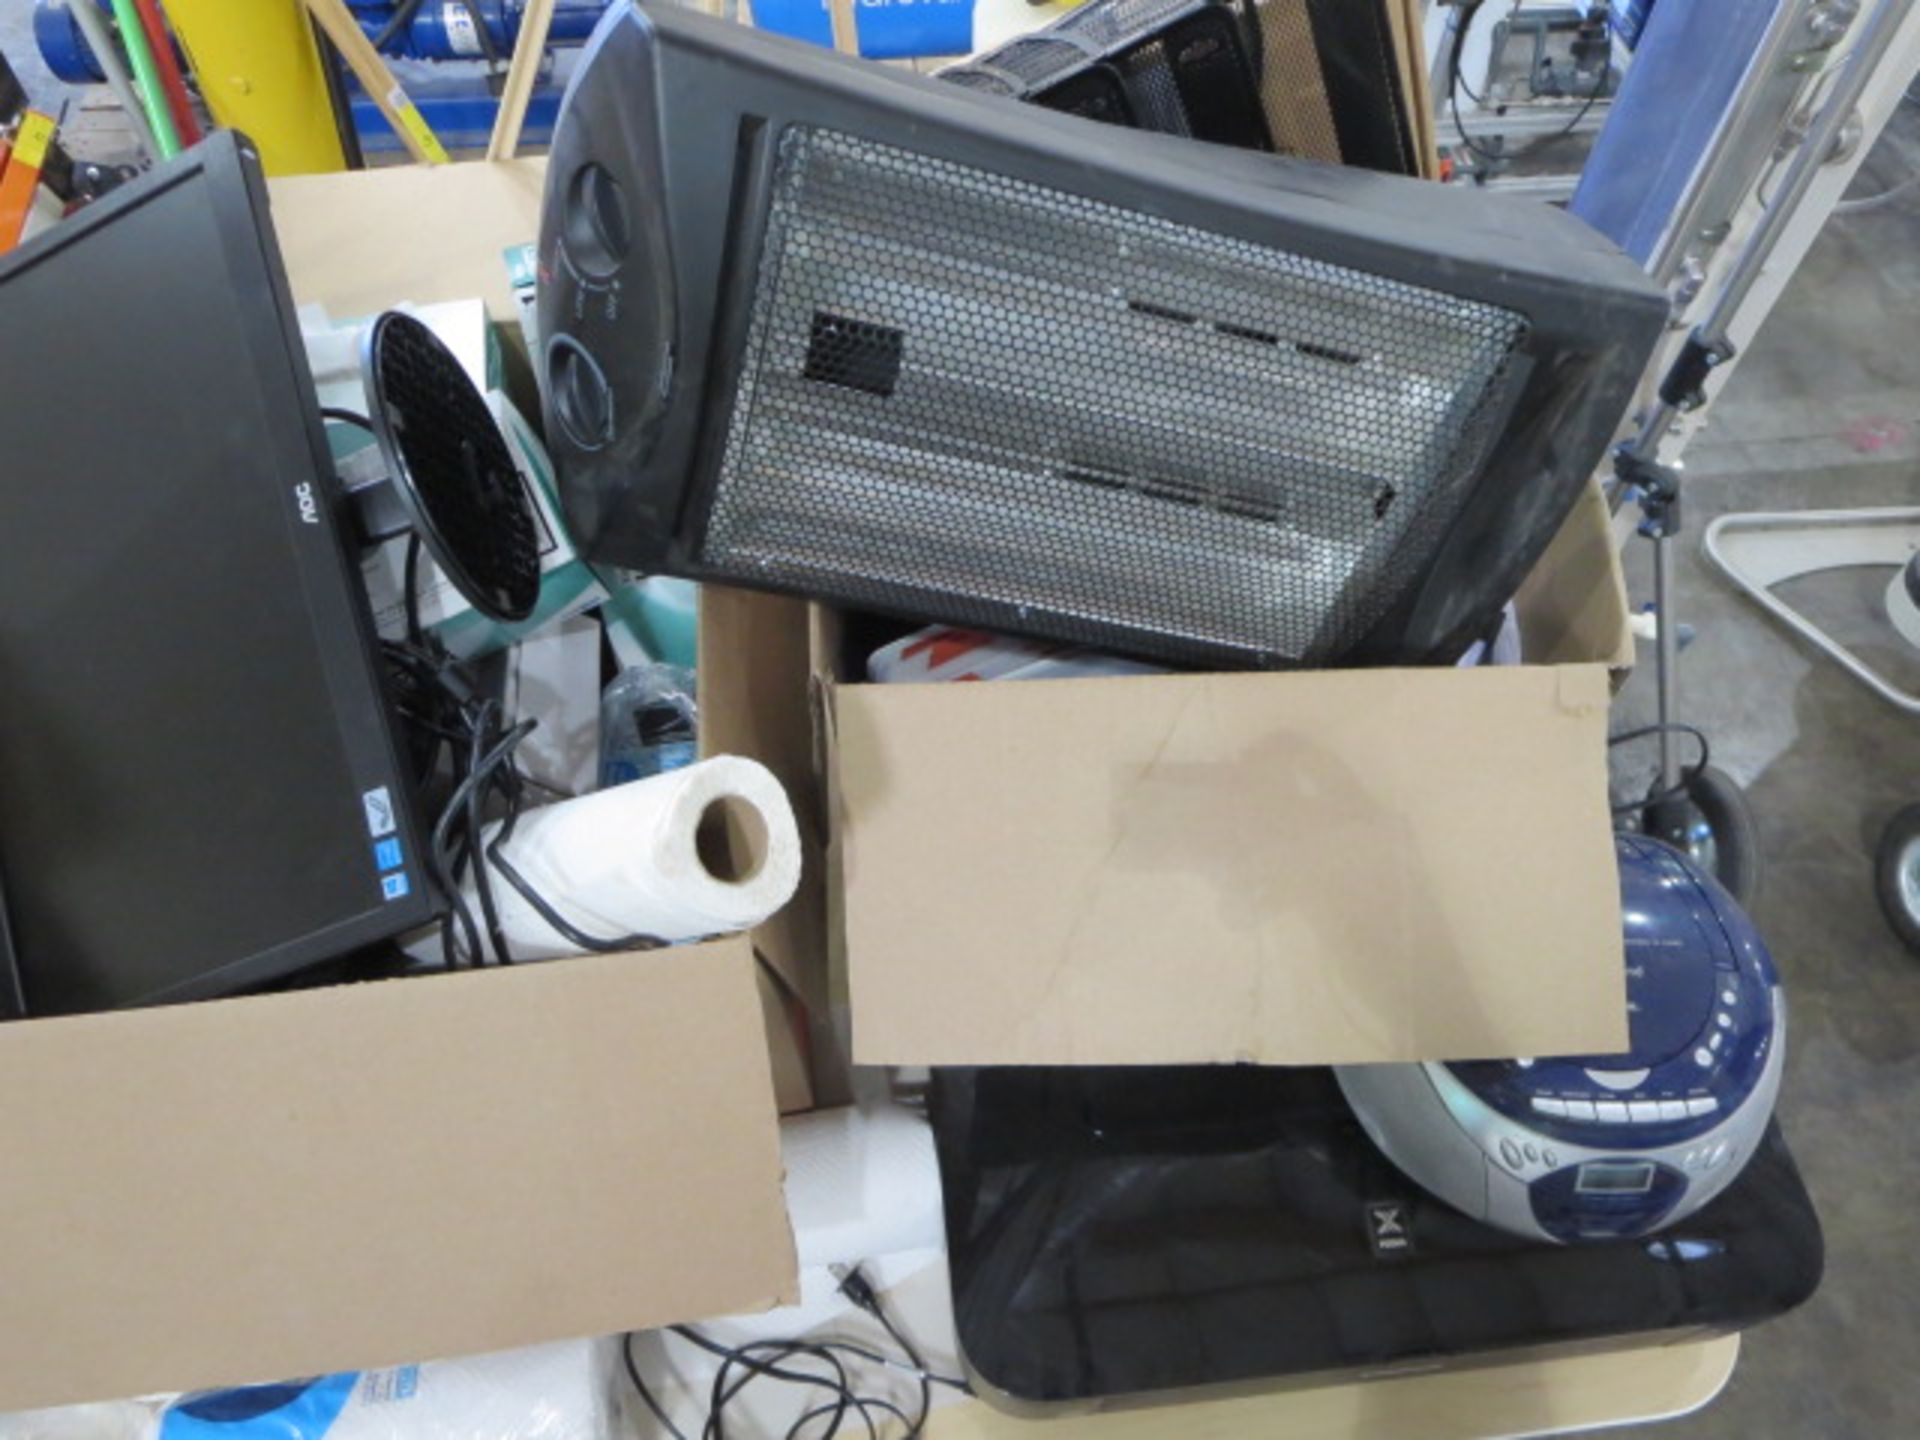 Office Supplies, Printer Monitor, Heater & More, Contents of Table - Image 2 of 2